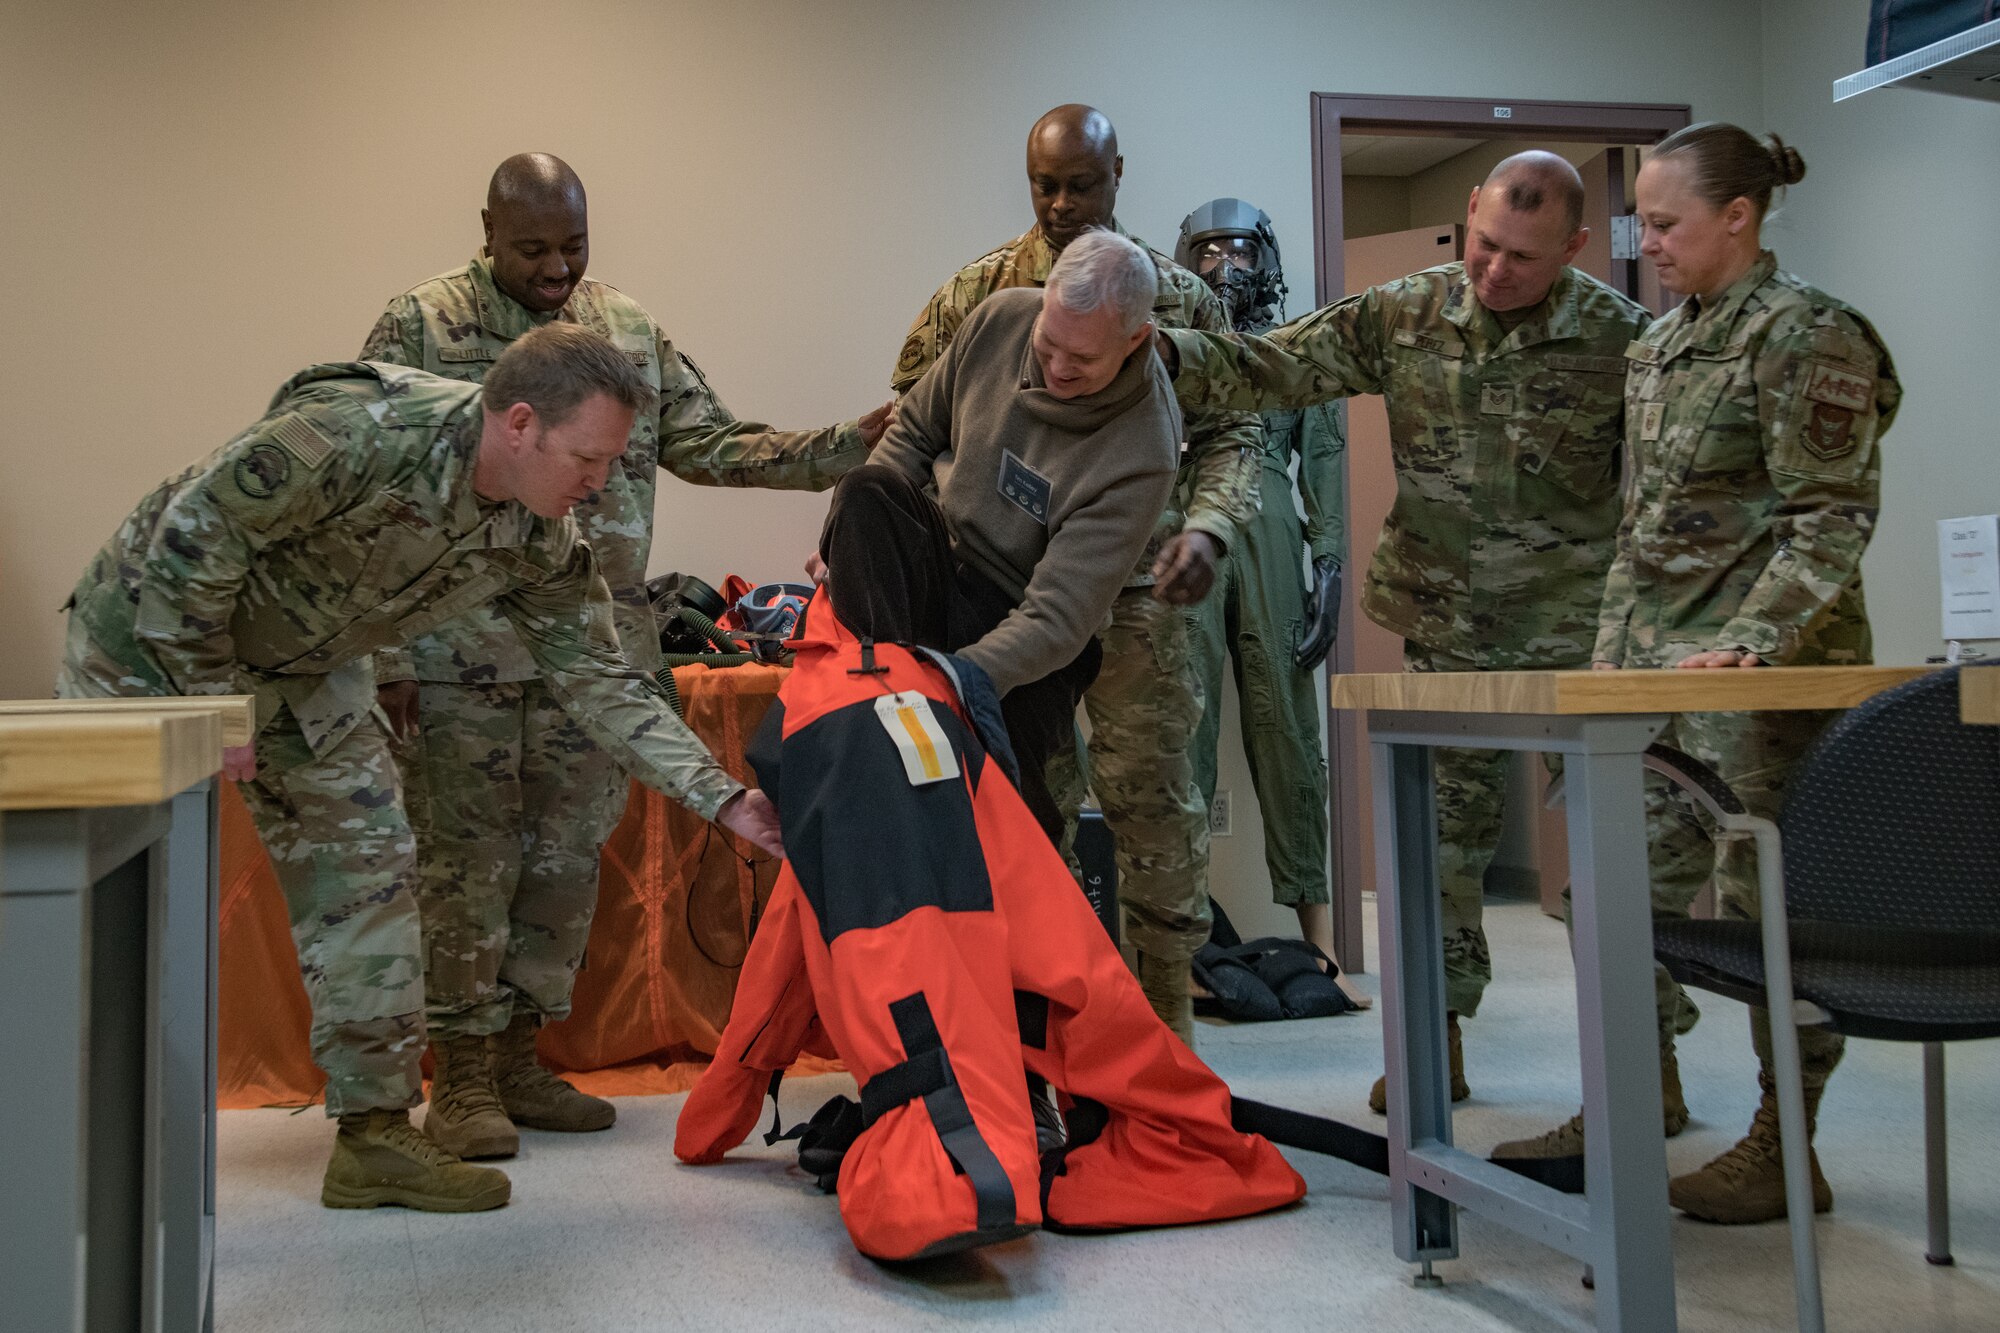 One civilian steps out of an orange suit with the help of five Air Force service members.